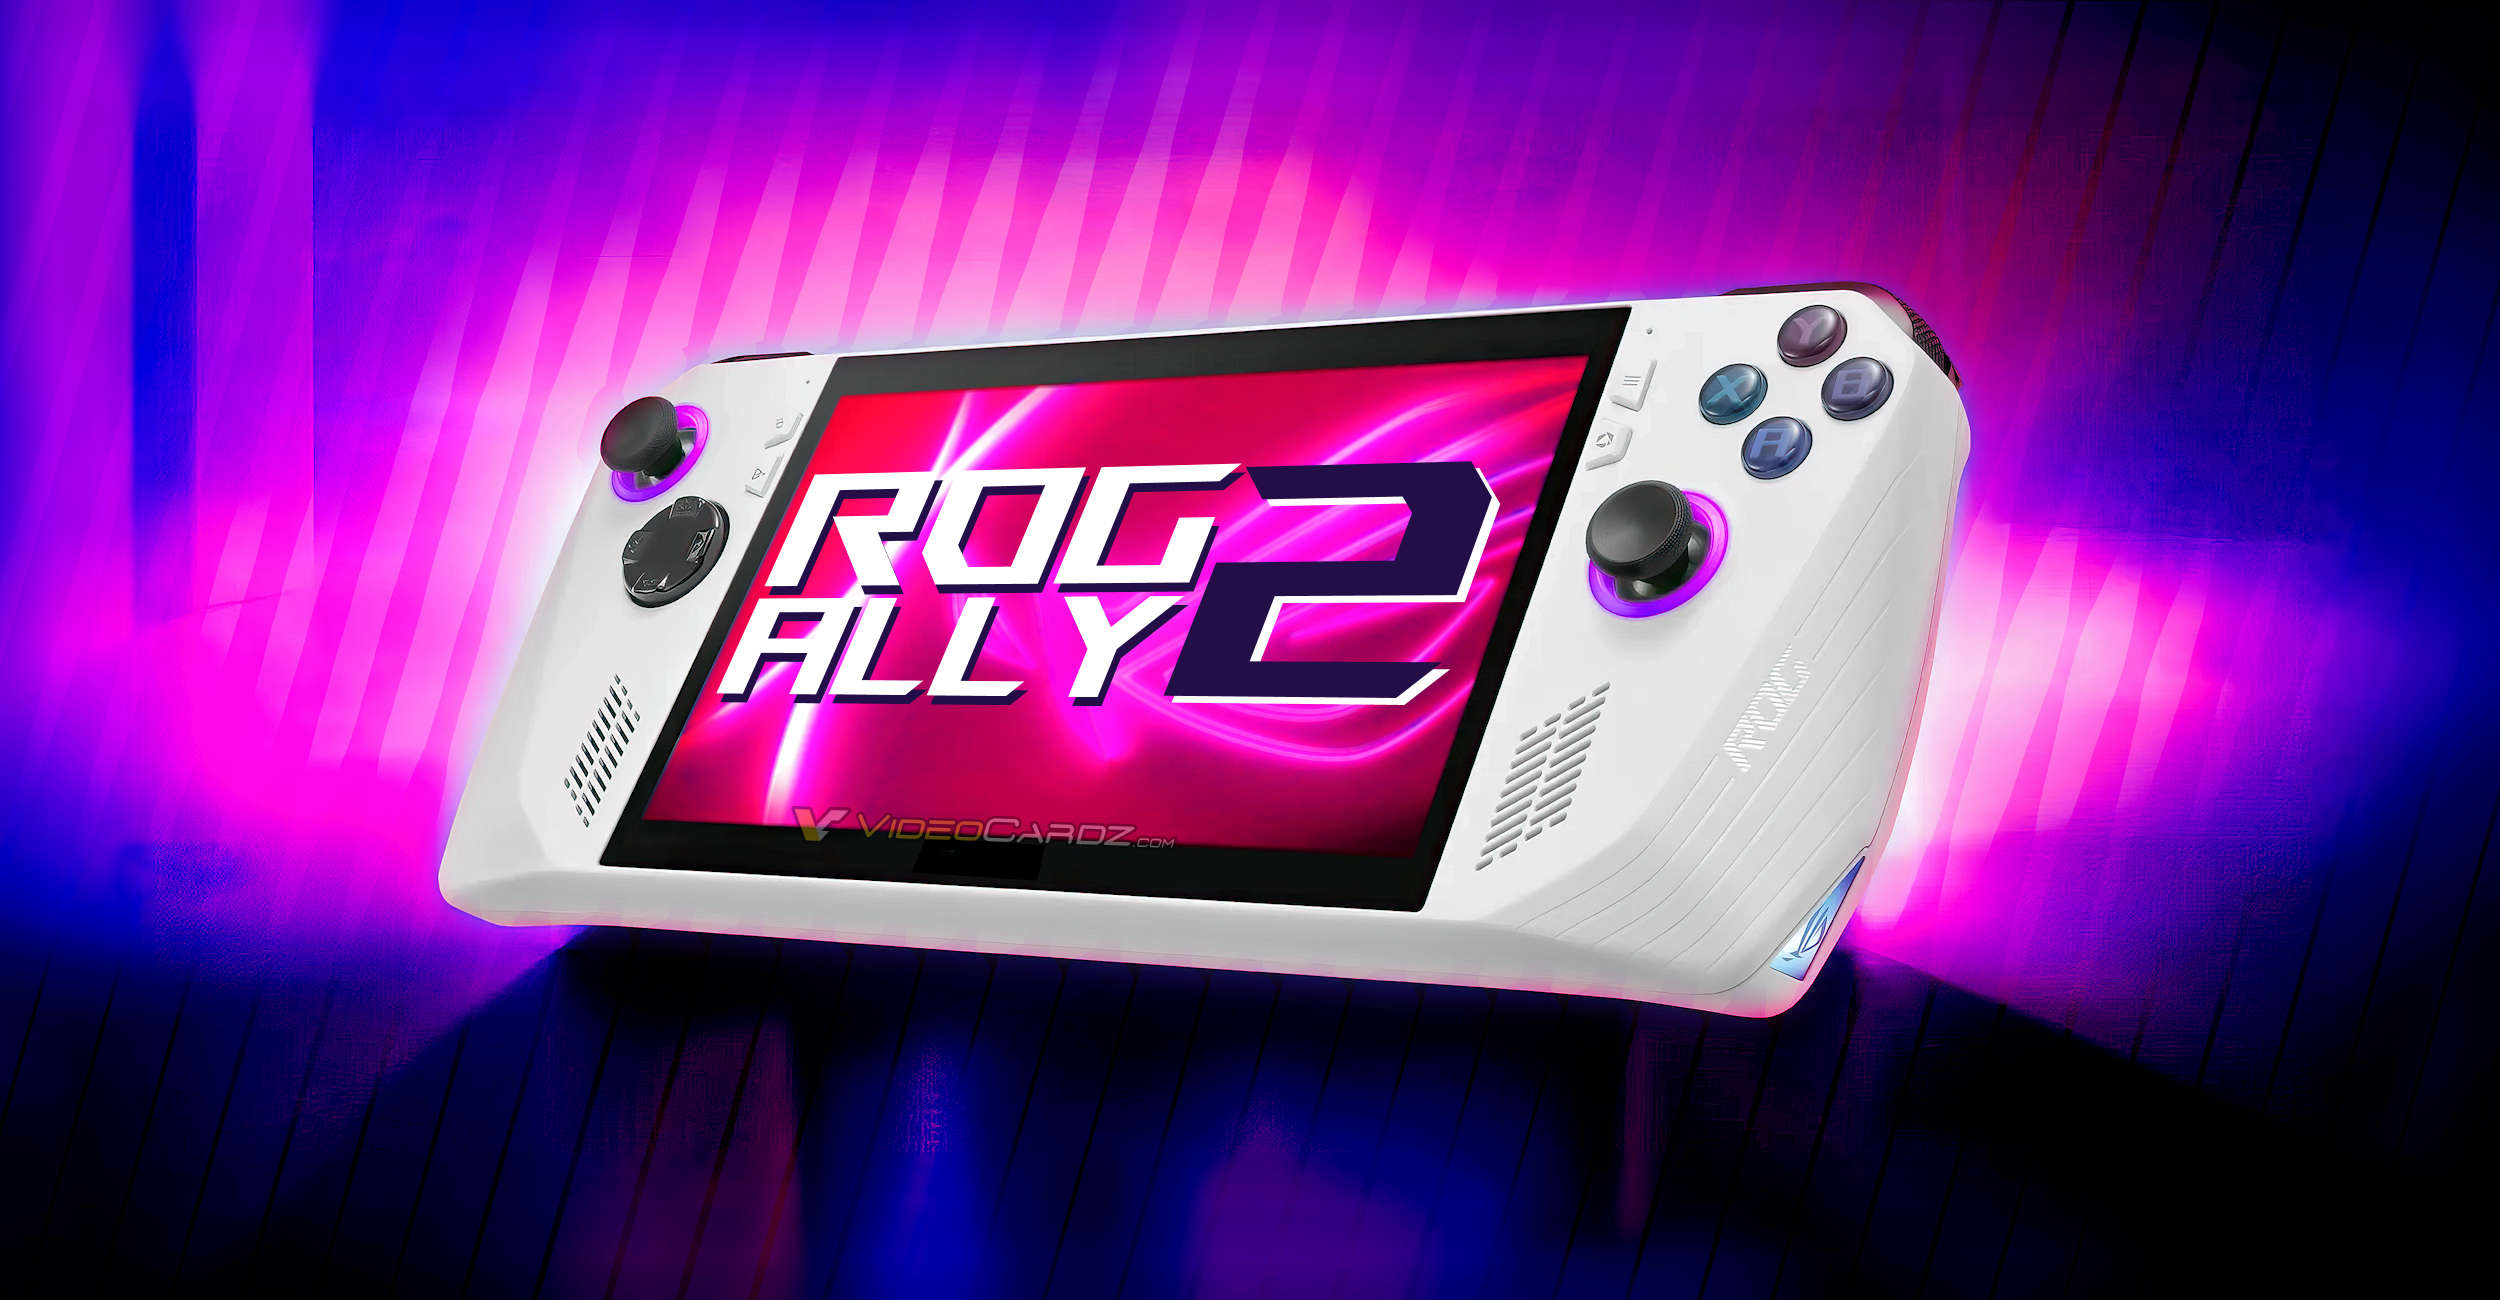 Asus ROG Ally: A Revolutionary Handheld Gaming PC with OLED Screen and AMD RDNA3 GPU Architecture